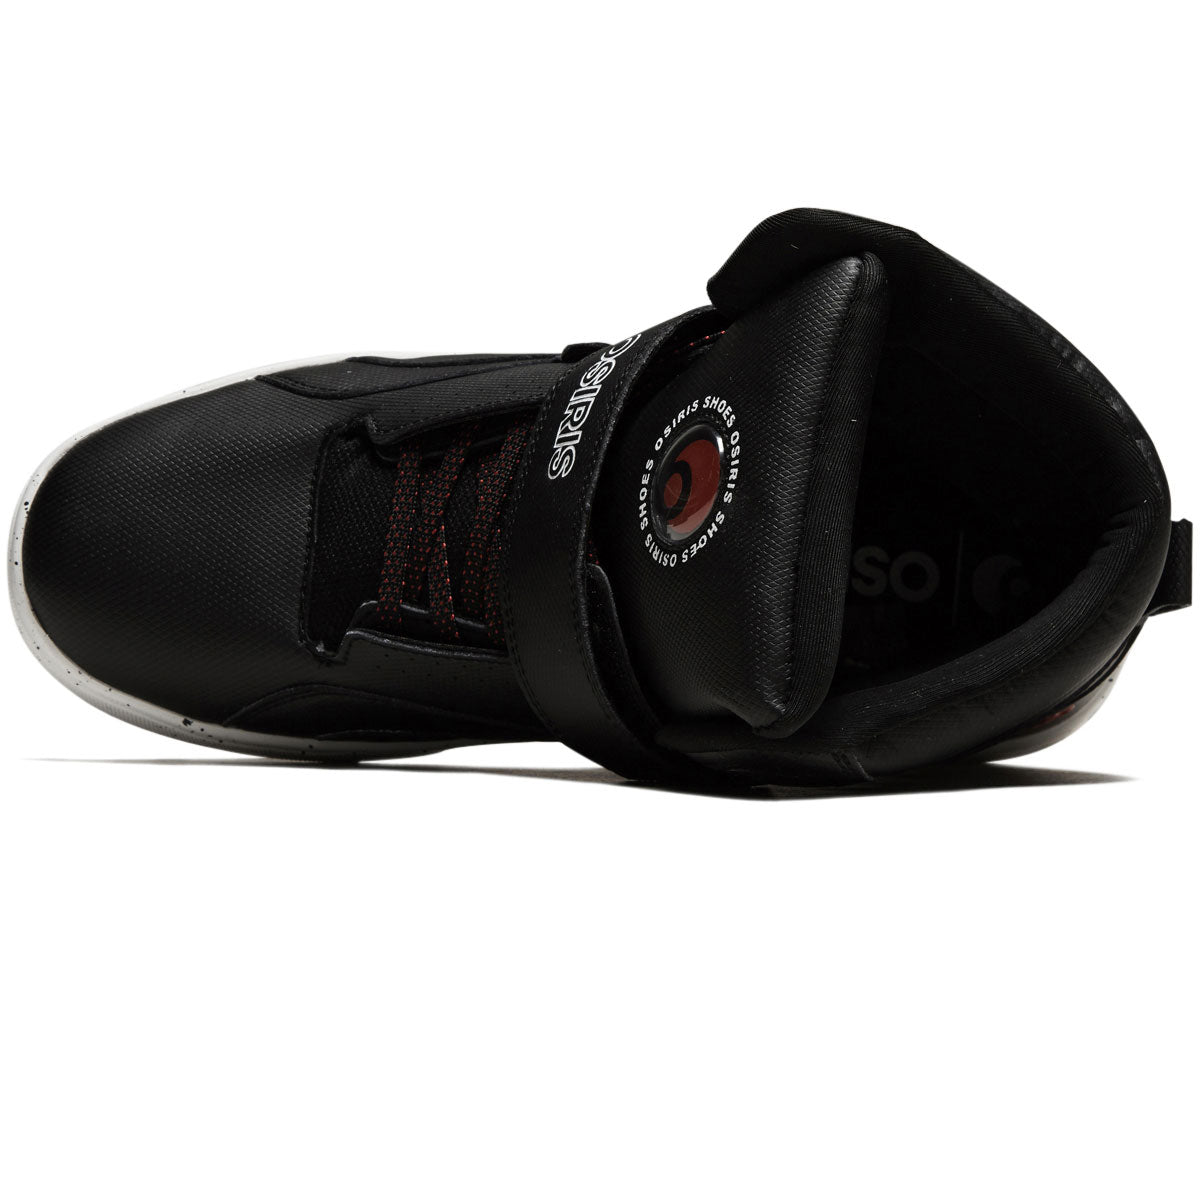 Osiris Rize Ultra Shoes - Black/Red/Spec image 3